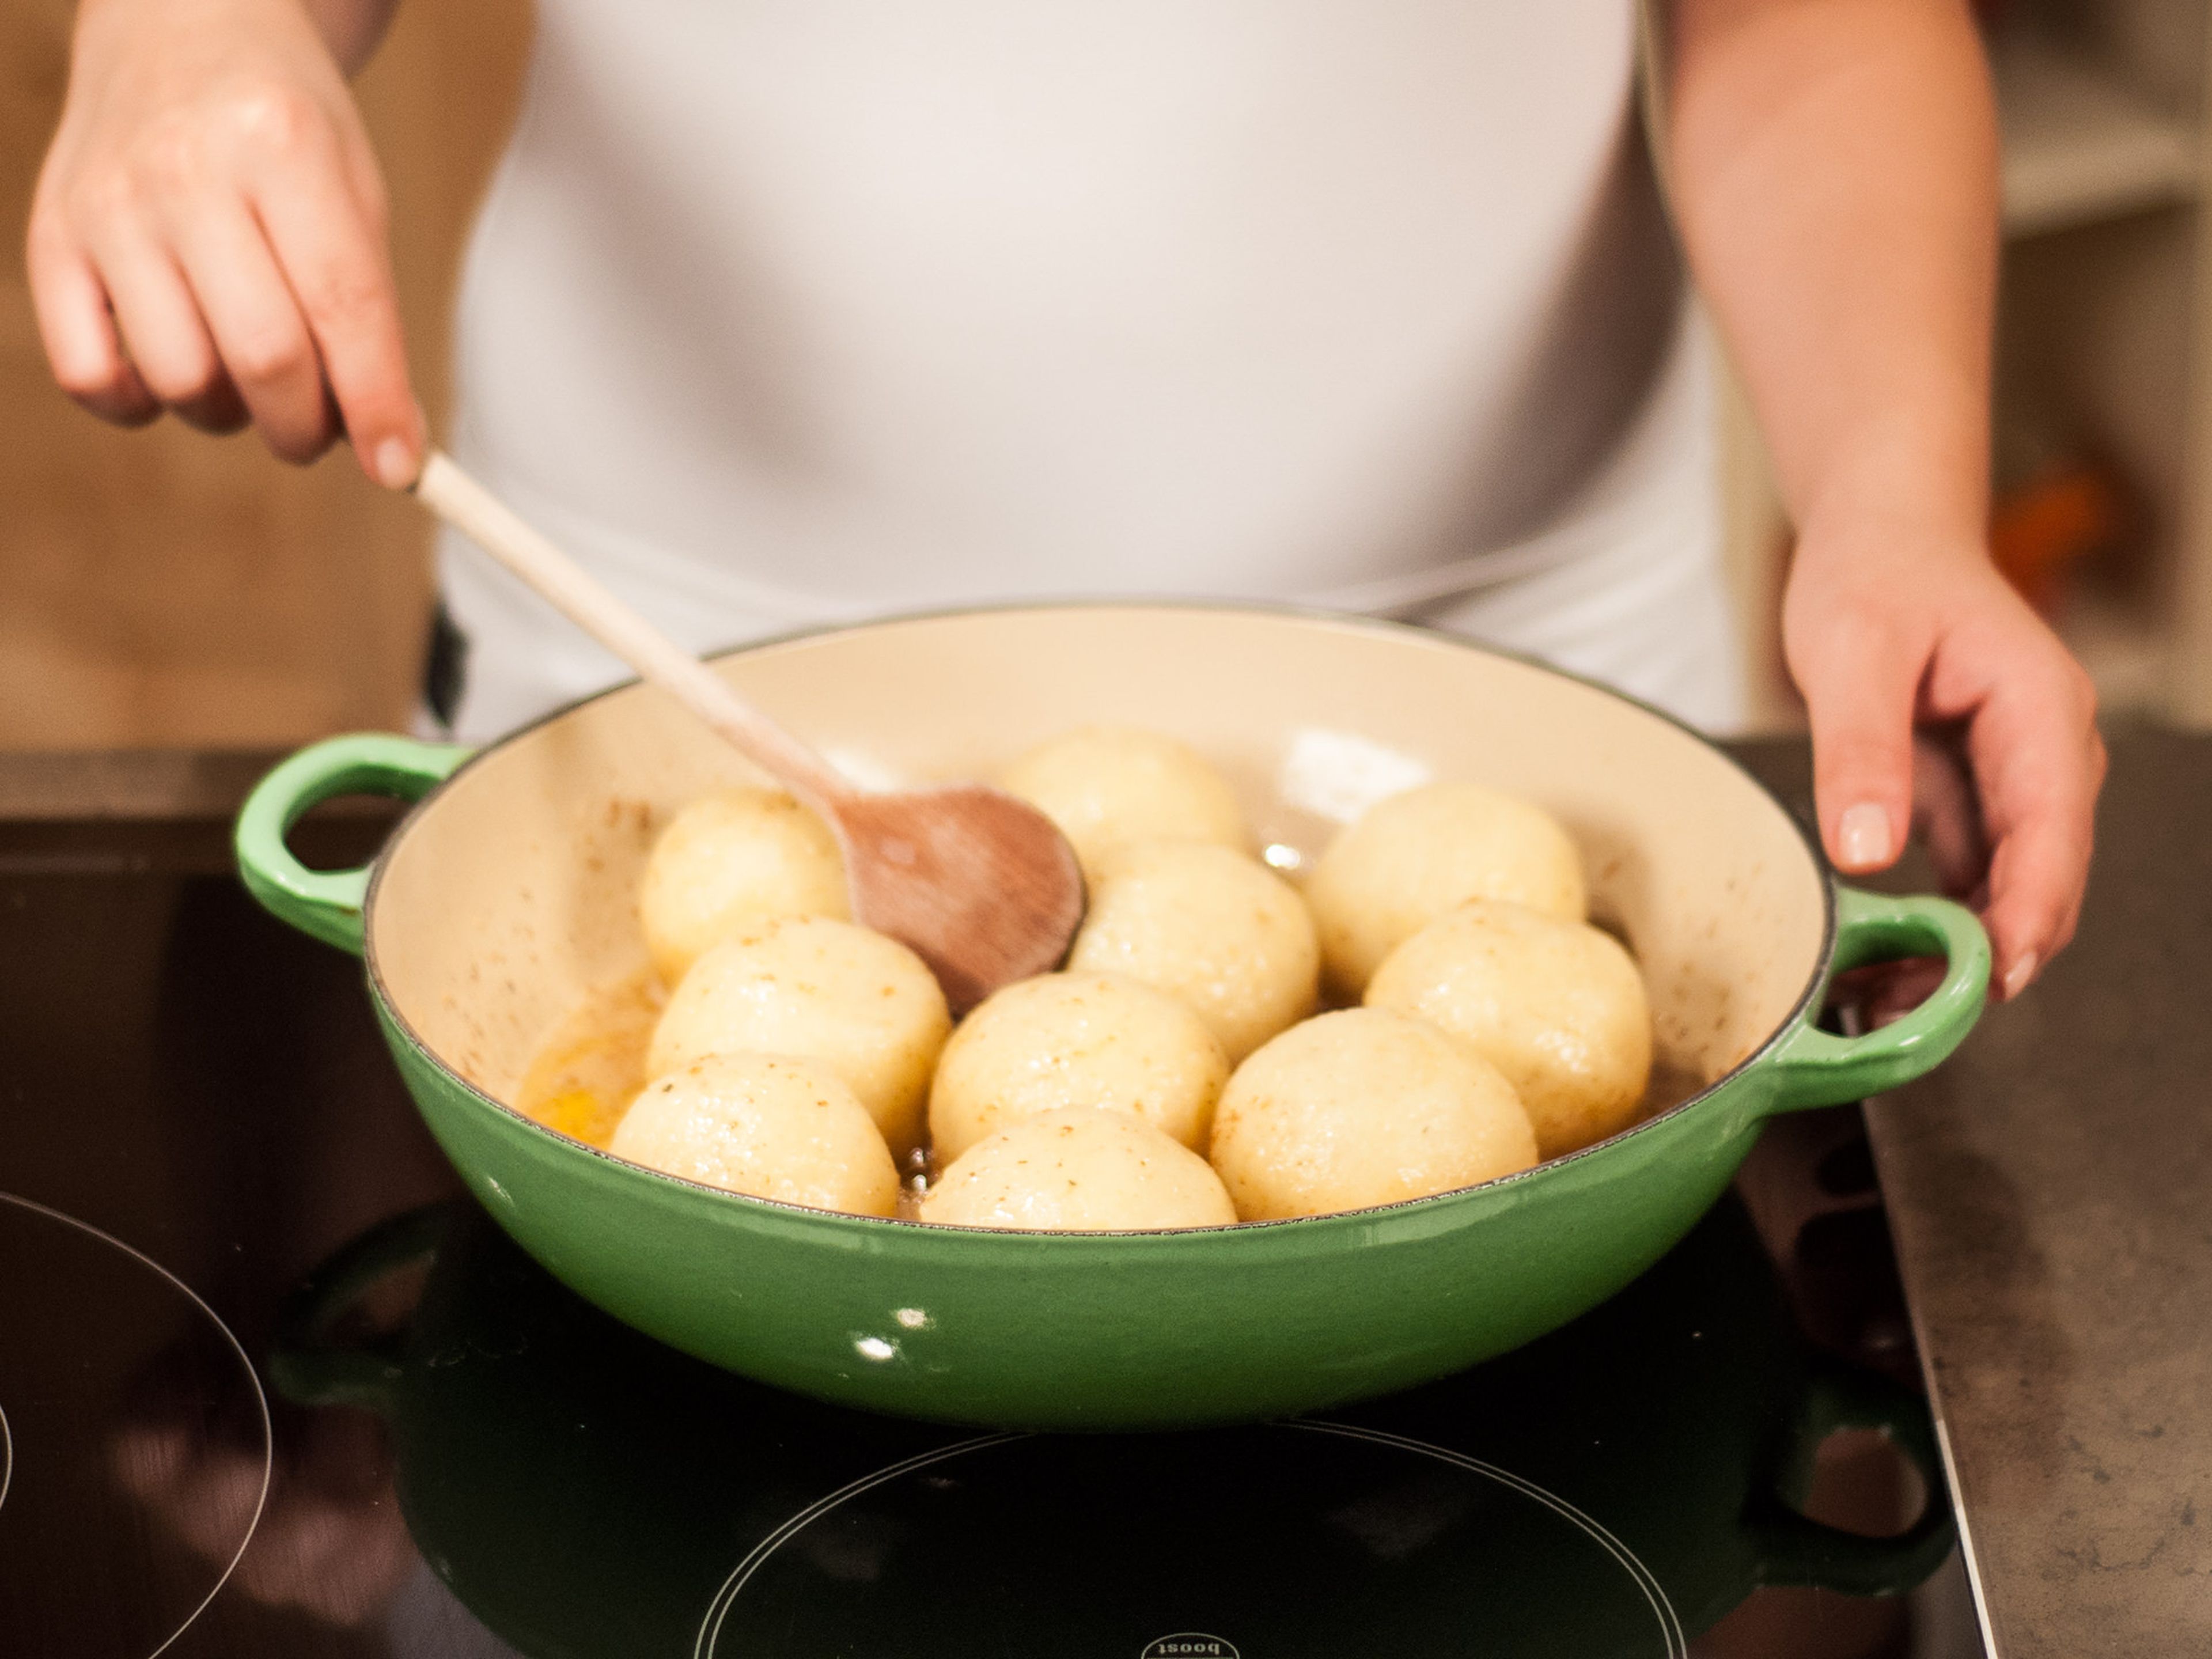 In a large frying pan, slowly heat remaining butter until light brown. Place dumplings into pan and gently toss in butter. Serve with a main course of your choice.